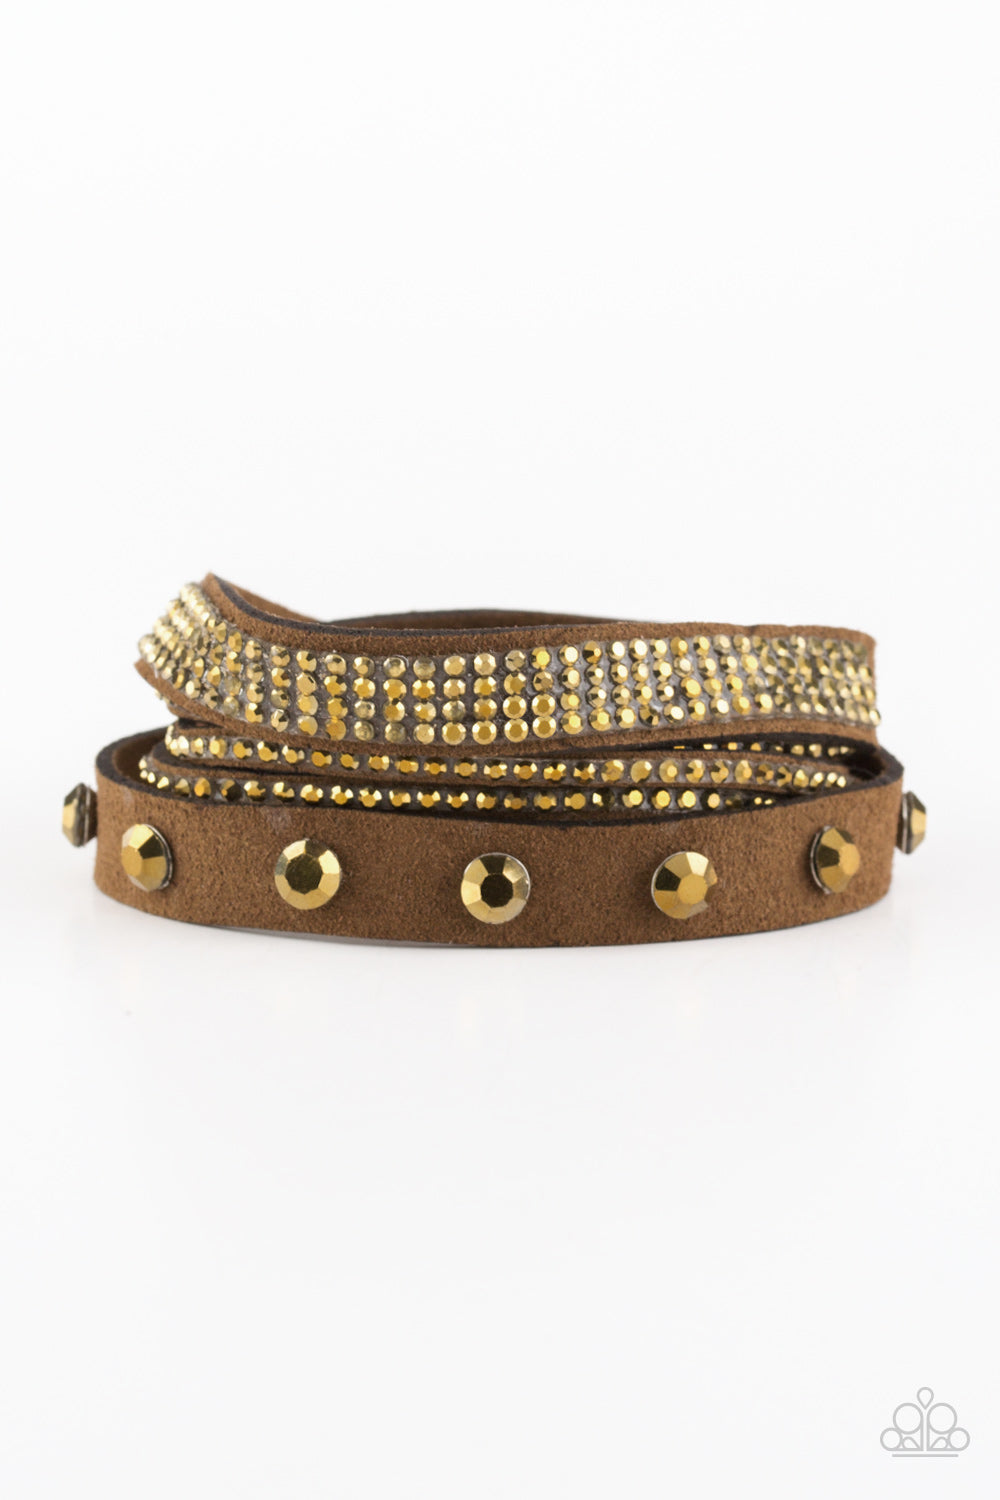 Totally Rockable - Brass and Brown Wrap Bracelet - Paparazzi Accessories - Brown suede is encrusted in sections of glittery aurum rhinestones for a sassy look. The band double wraps around the wrist for a fierce one-of-a-kind look. Features an adjustable snap closure.